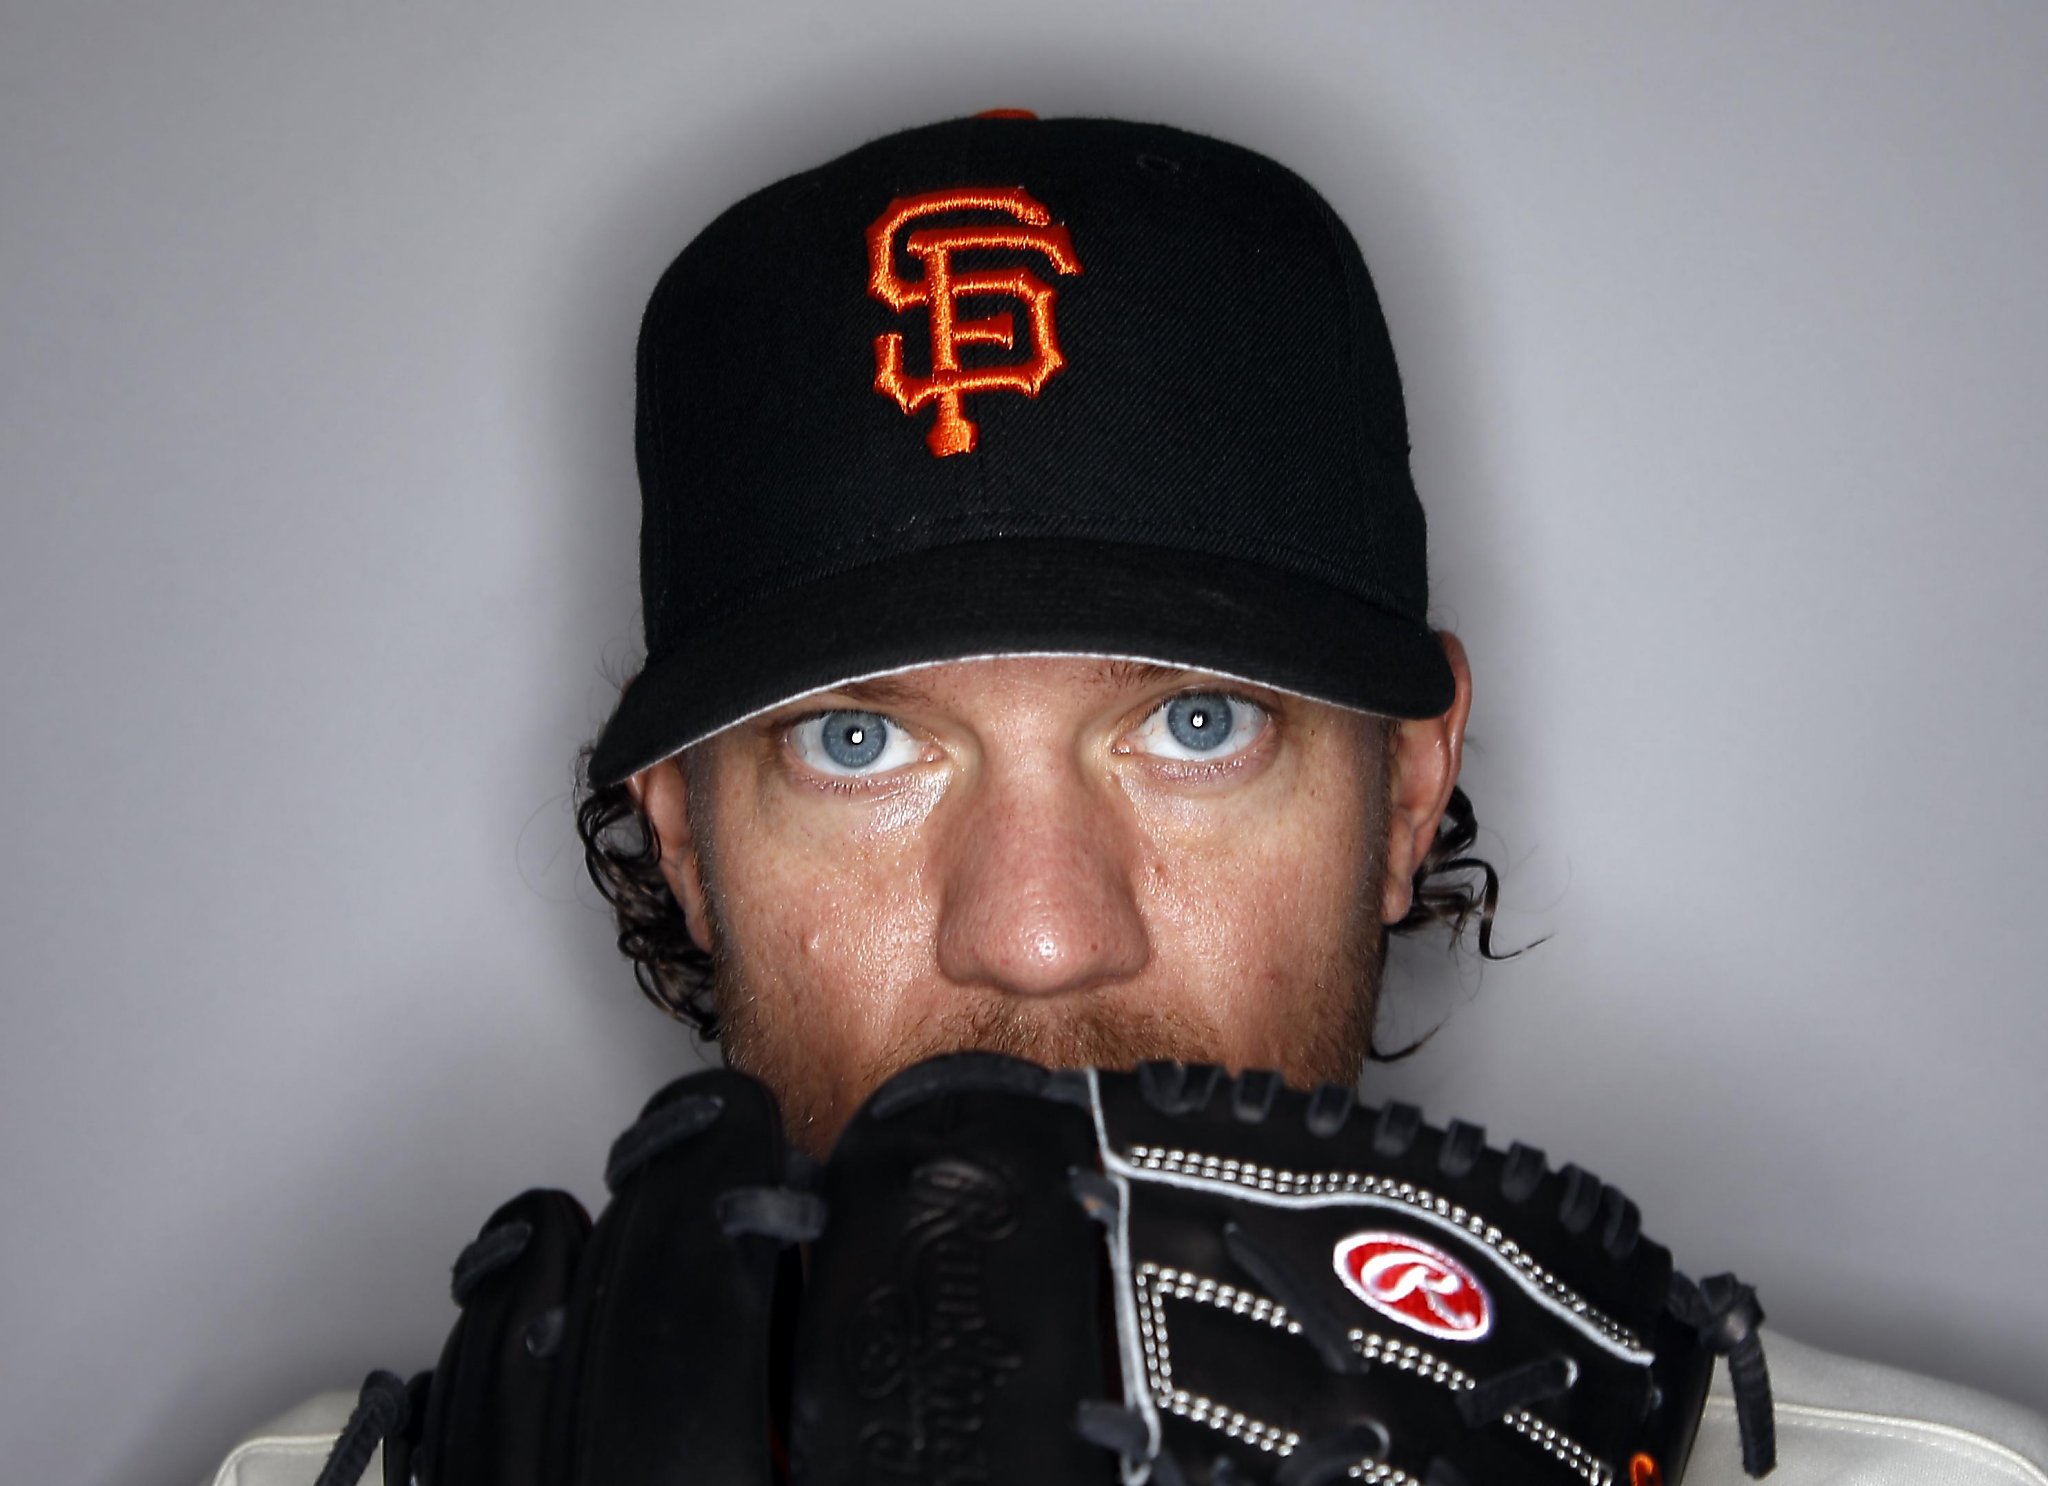 Jake Peavy, San Francisco Giants pitcher and Deadhead: 'Too grateful to be  hateful' – Marin Independent Journal